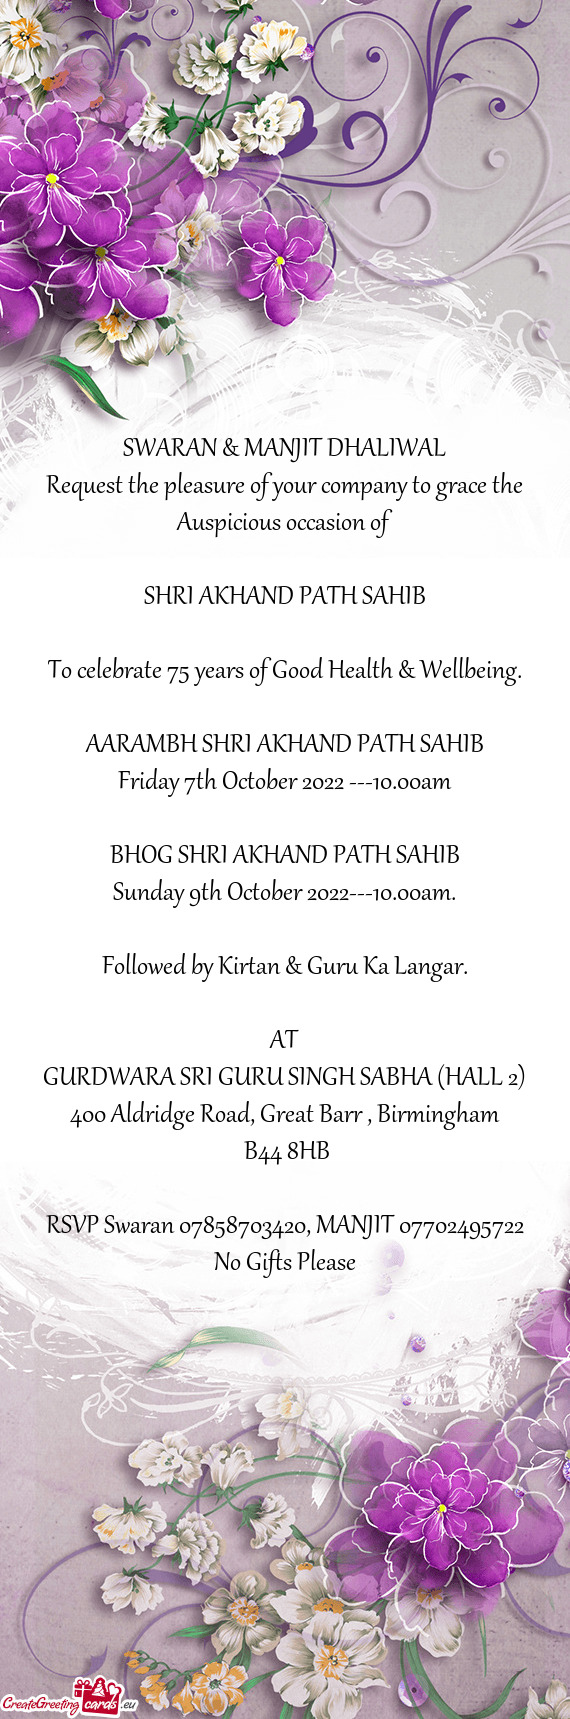 To celebrate 75 years of Good Health & Wellbeing